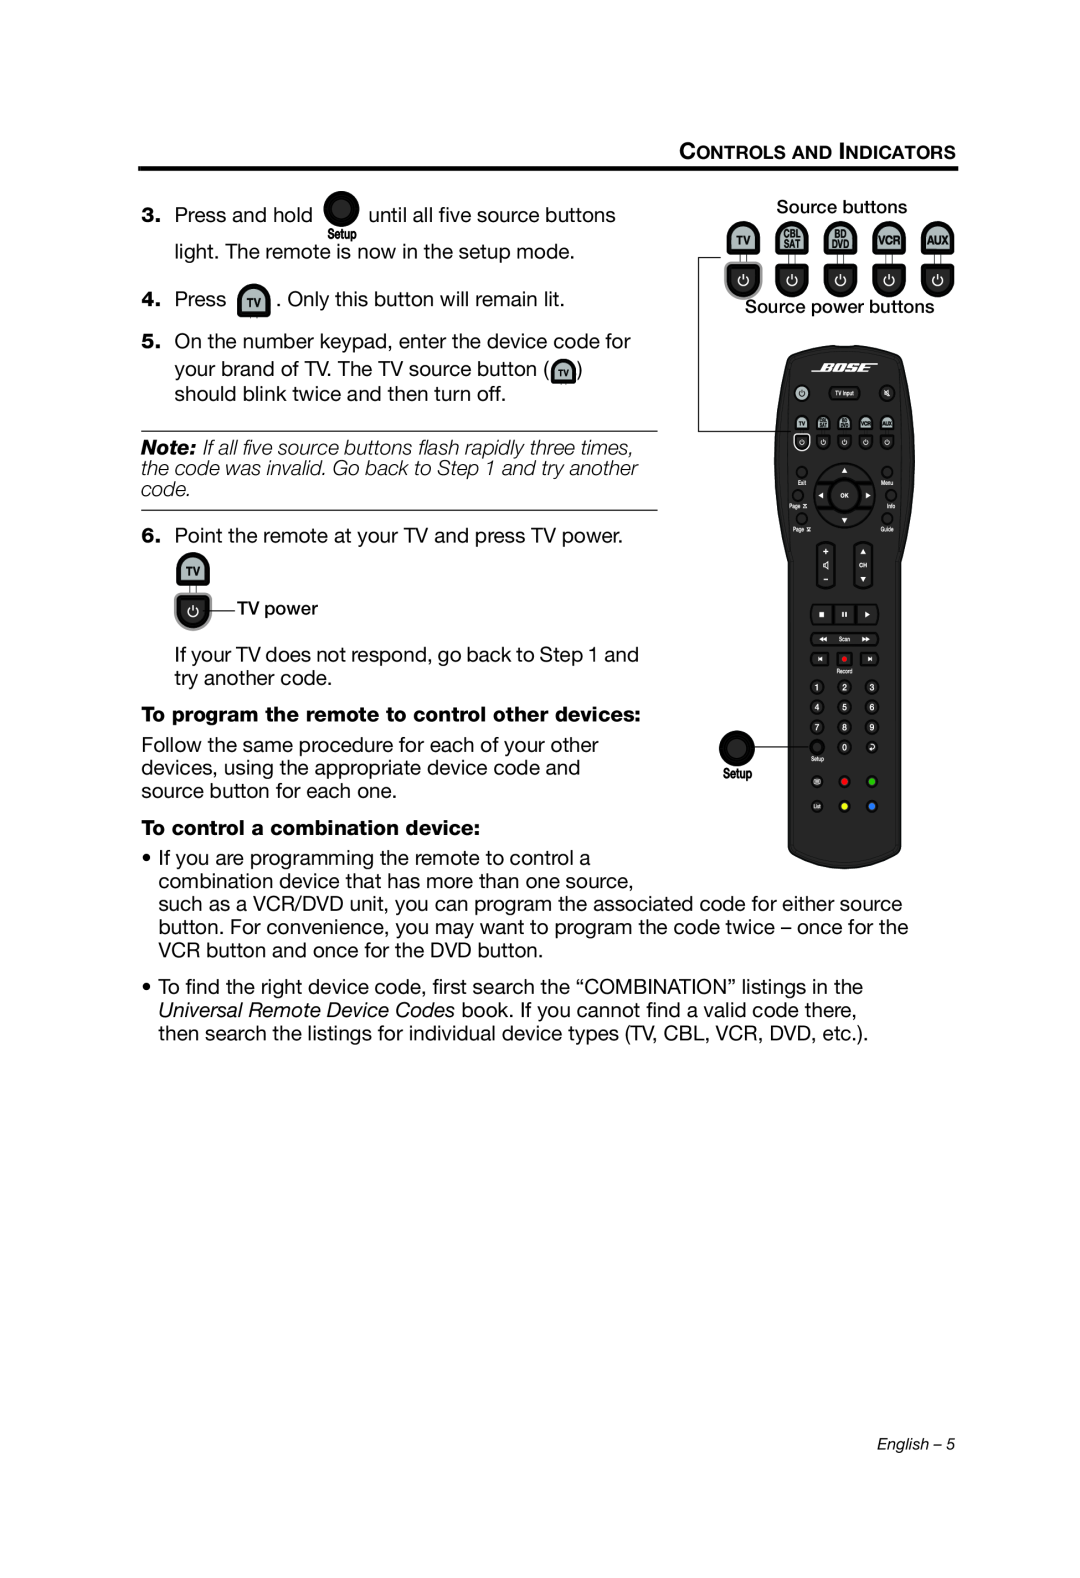 Bose 1 SR manual To program the remote to control other devices, To control a combination device 